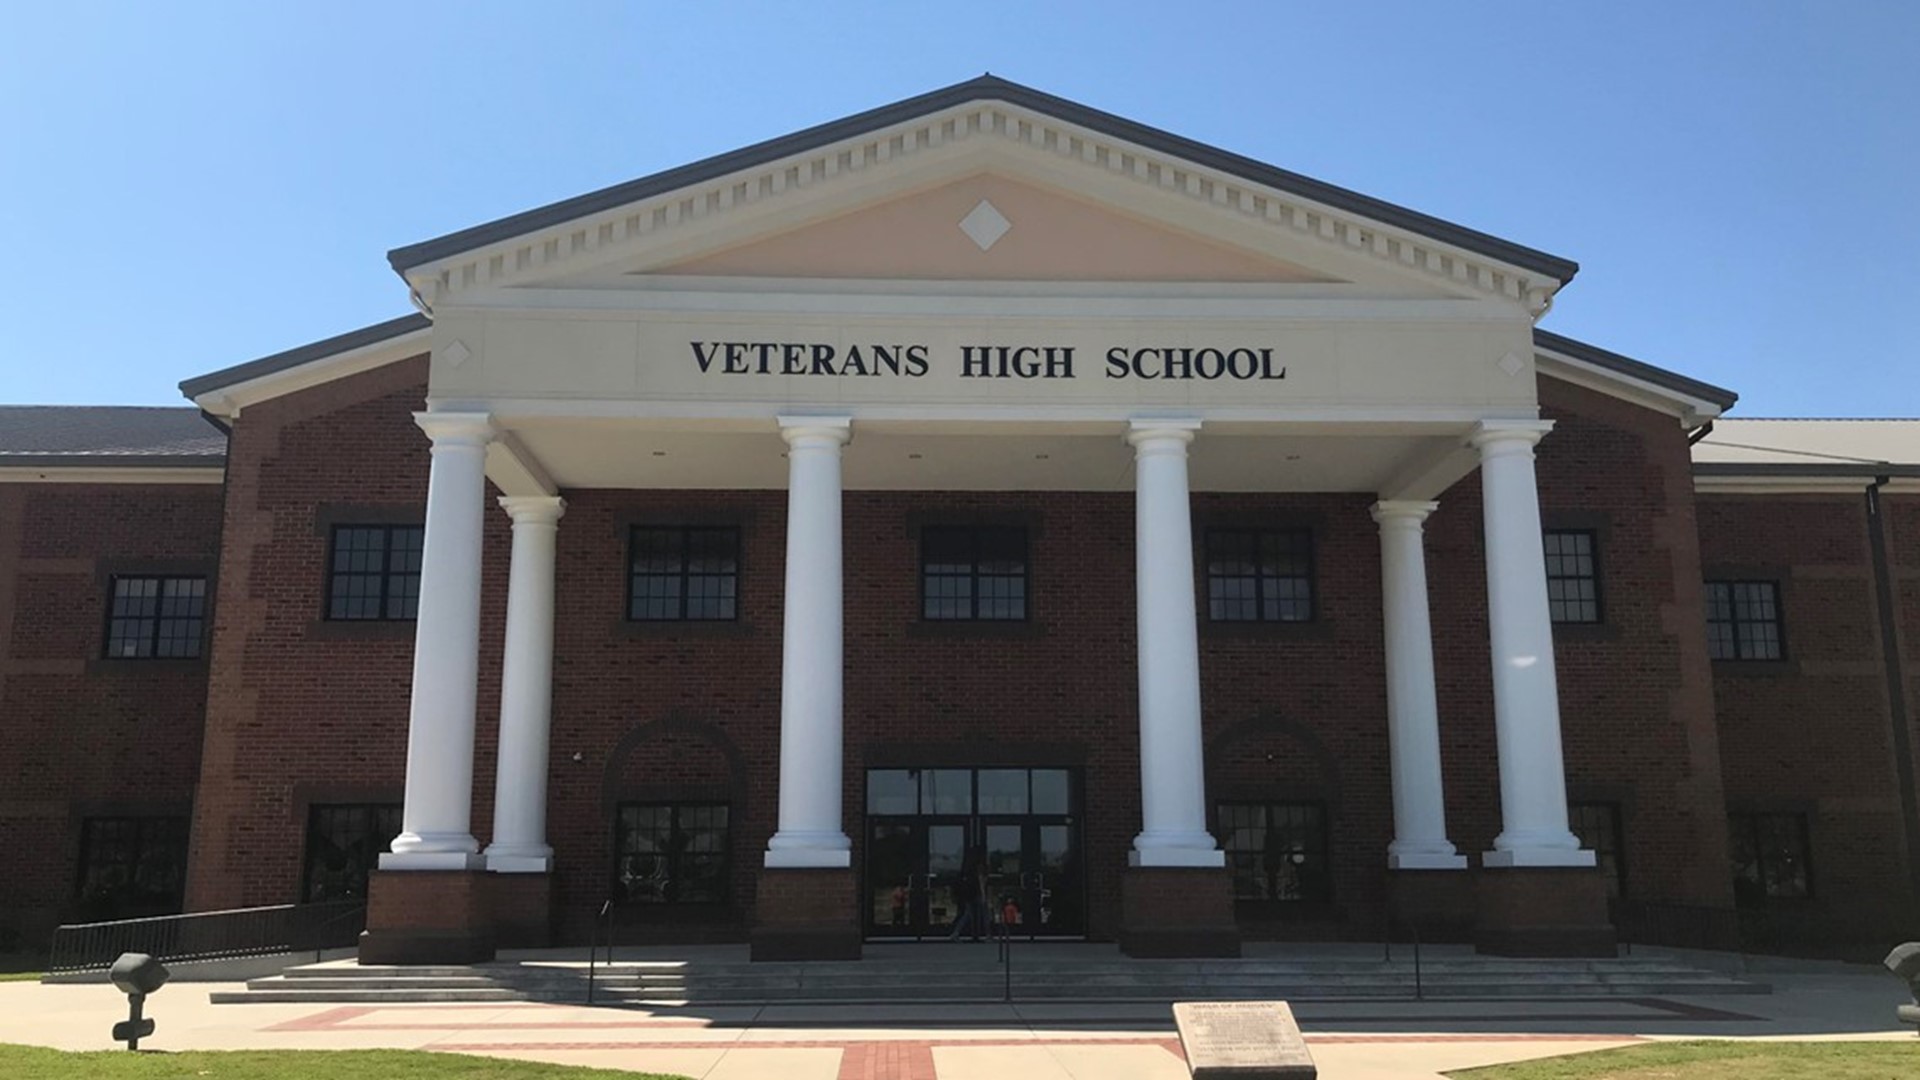 Two Houston County families have filed a civil rights complaint against Veterans High School after they say a coach used the "N-word" to address their daughters.